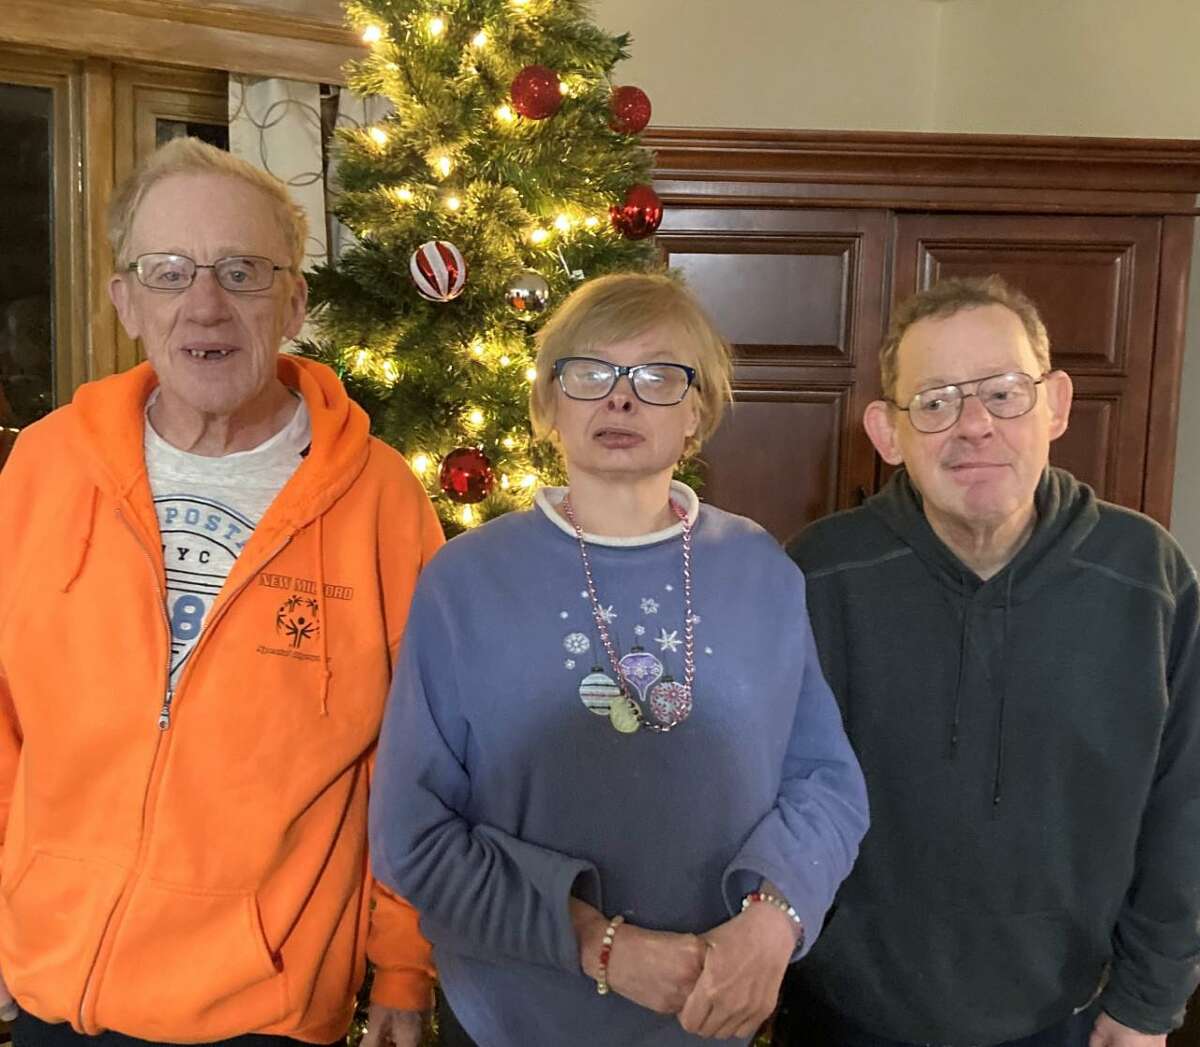 The 501(c)3 organization, Ability Beyond, has received a $9,000 charitable contribution from the Ellen Knowles Harcourt Foundation private non-profit organization. Marty, Tommy, and Kathryn, of Ability Beyond, recently celebrate the Christmas holiday, at the Ability Beyond home in New Milford.